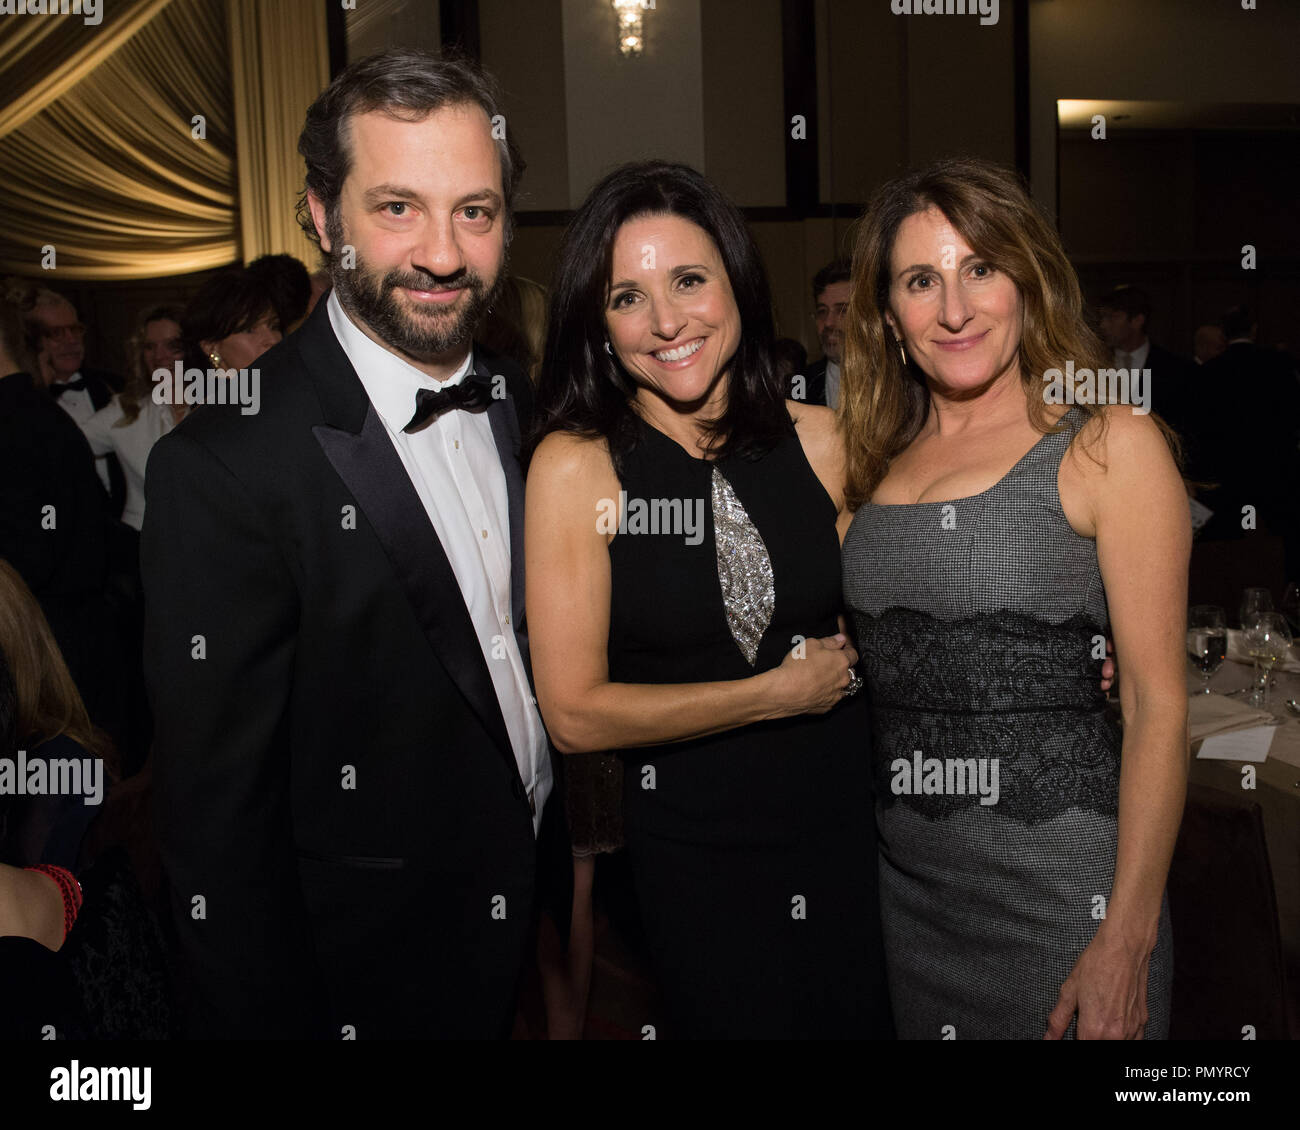 Director Judd Apatow (left), actress Julia Louis-Dreyfus (center) and director Nicole Holofcener attend the 5th Annual Governors Awards at The Ray Dolby Ballroom at Hollywood & Highland Center® in Hollywood, CA, on Saturday, November 16, 2013.  File Reference # 32184_112  For Editorial Use Only -  All Rights Reserved Stock Photo